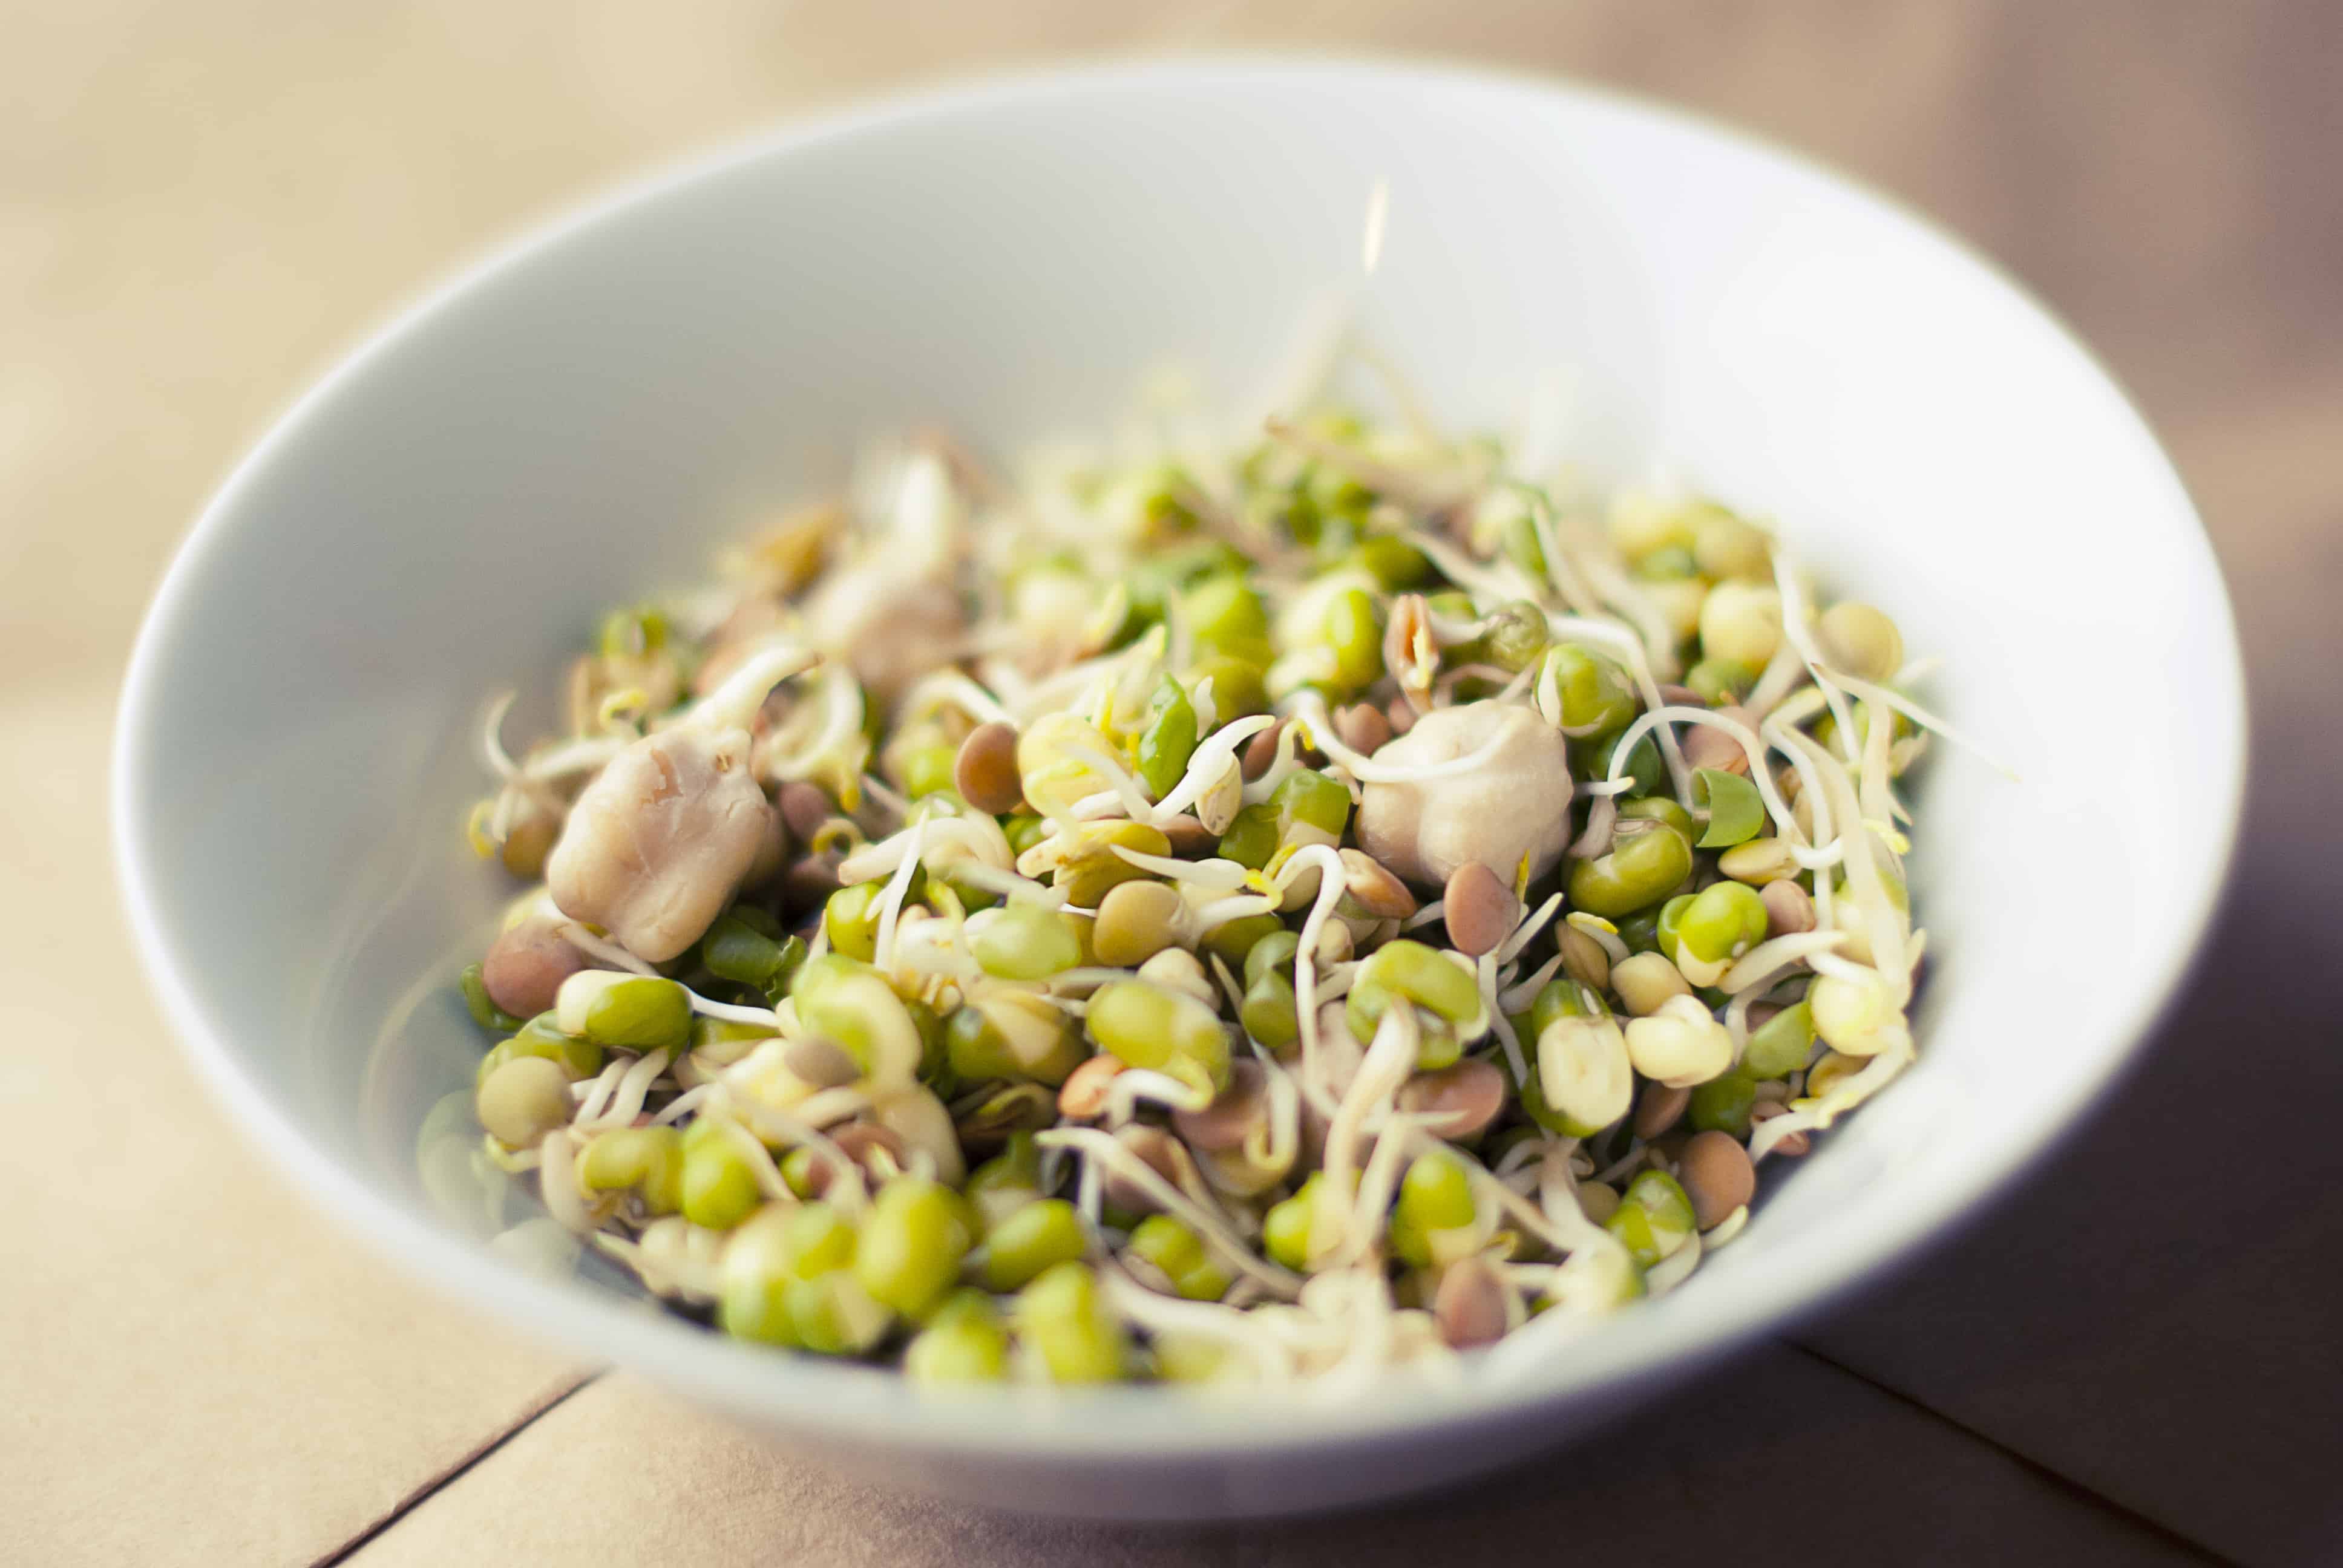 How To Eat Sprouts For Weight Loss, According To These Dieticians